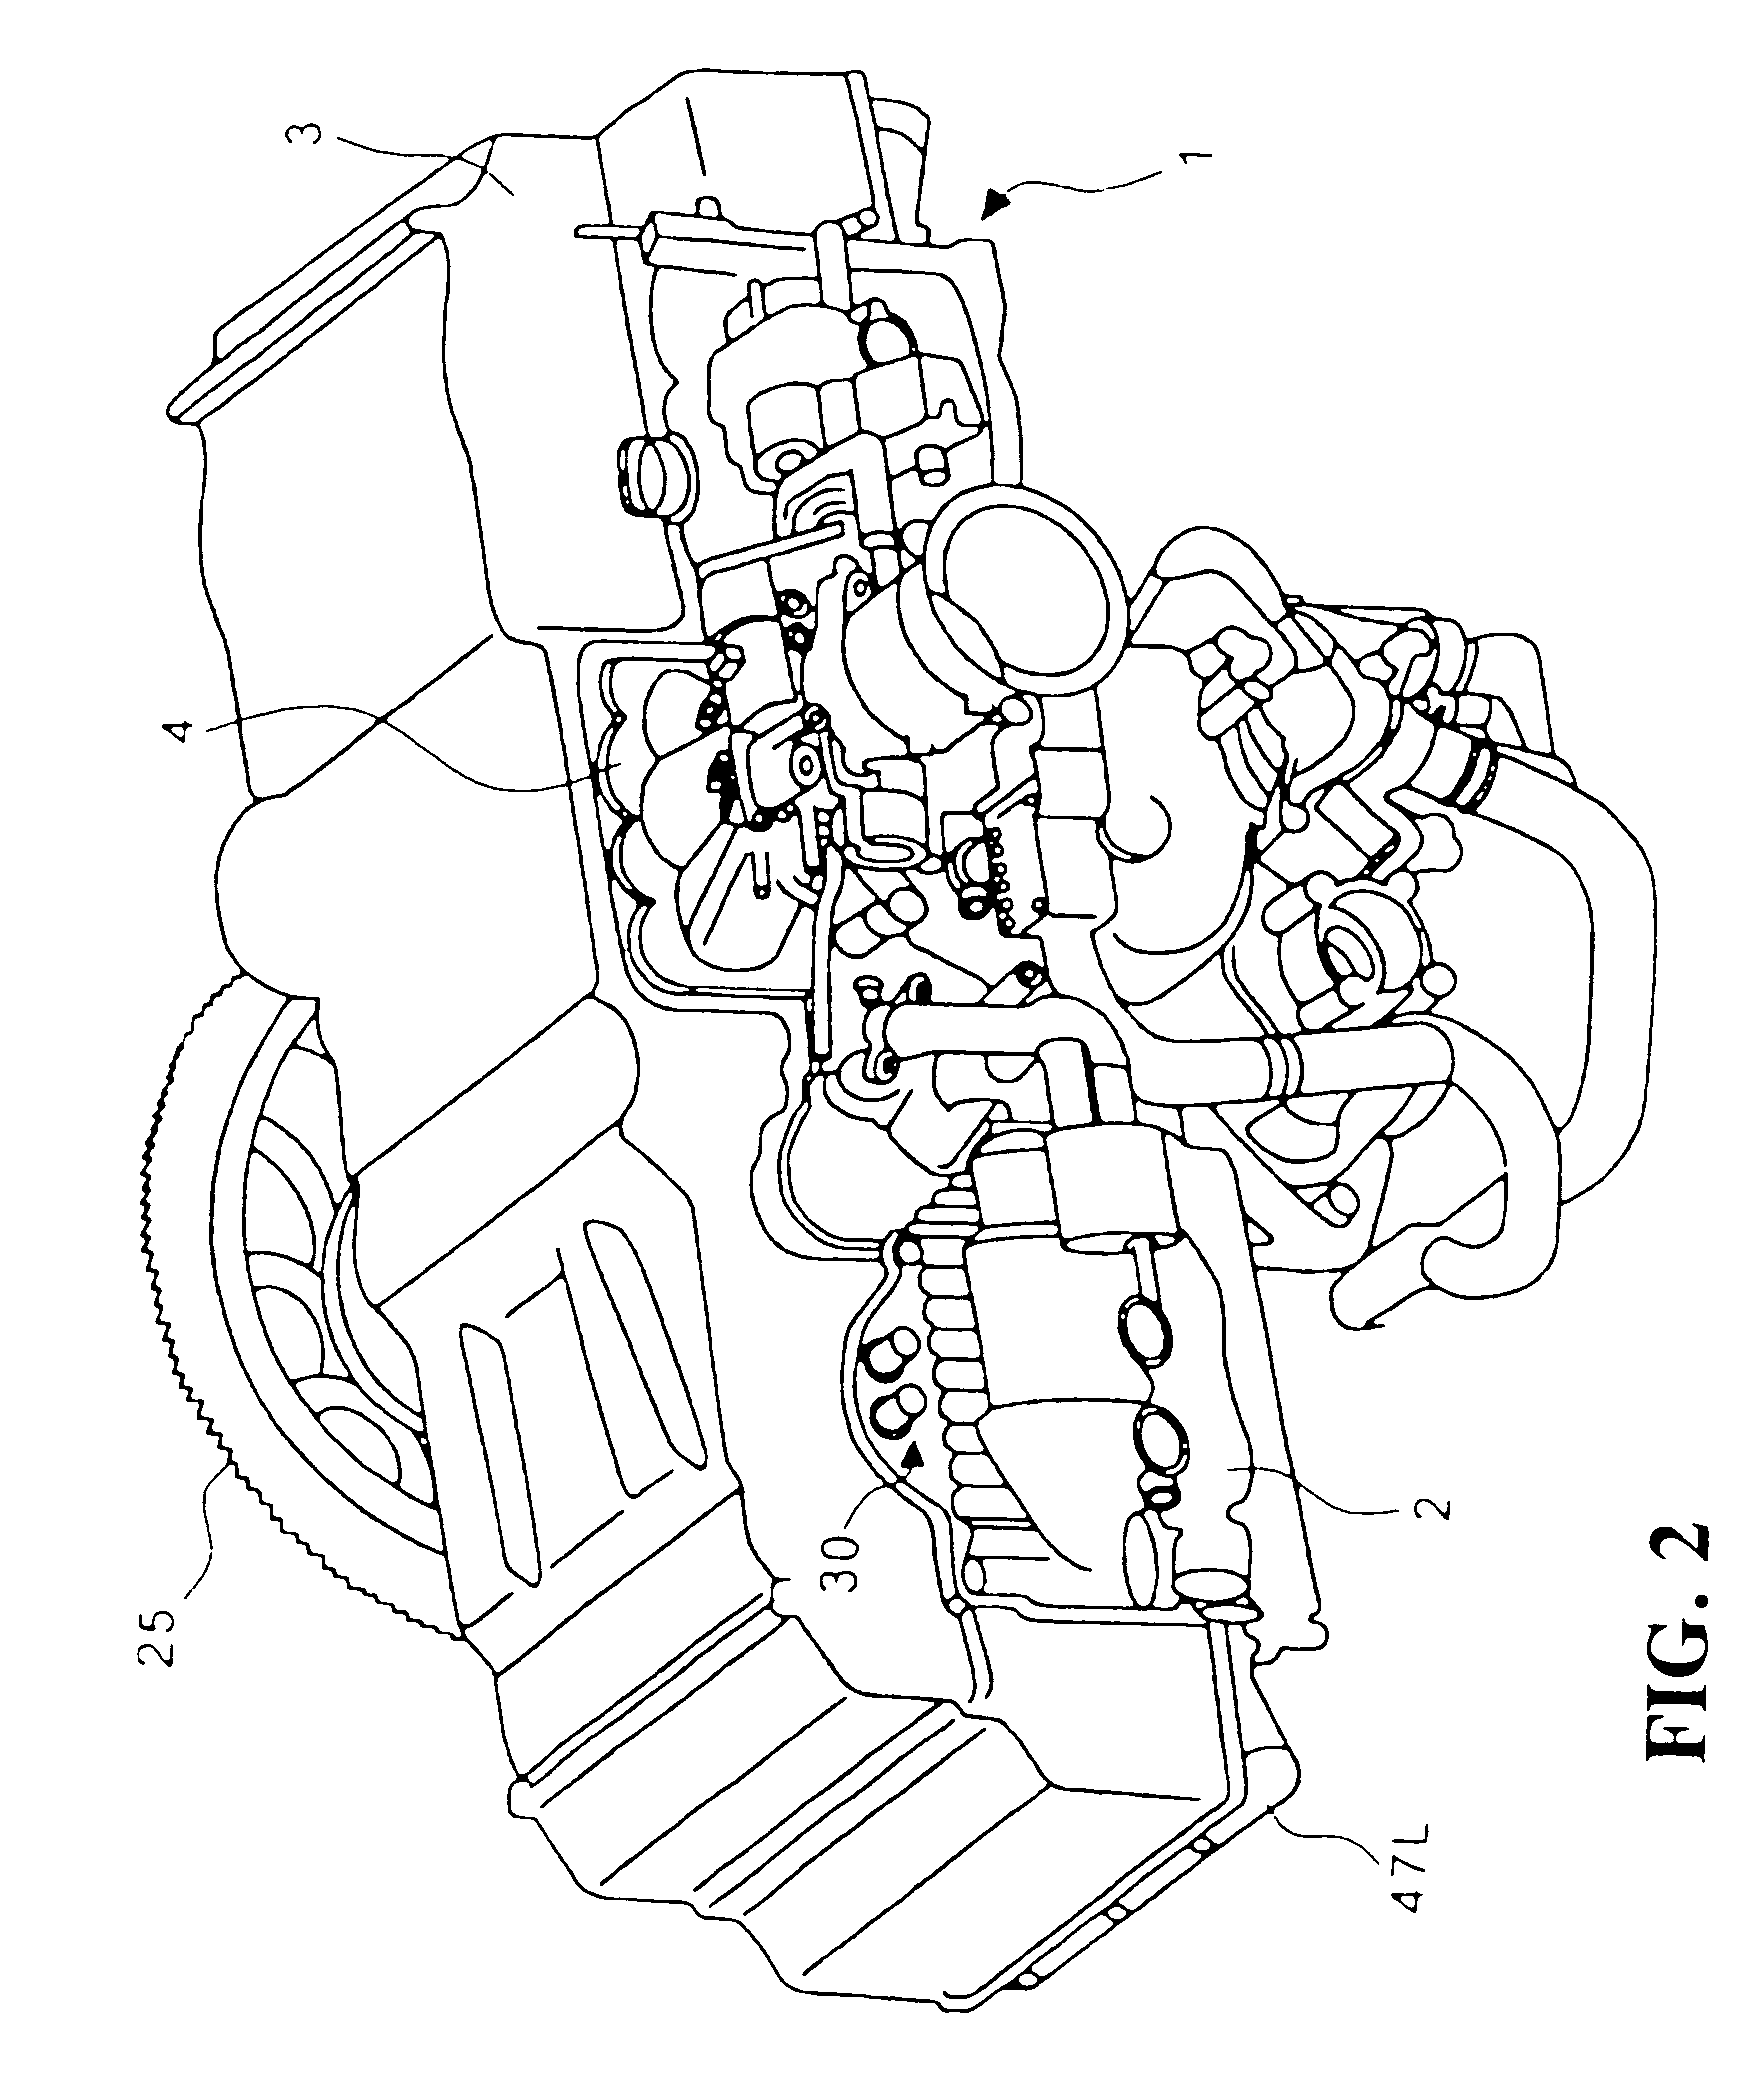 Harness outlet structure of engine